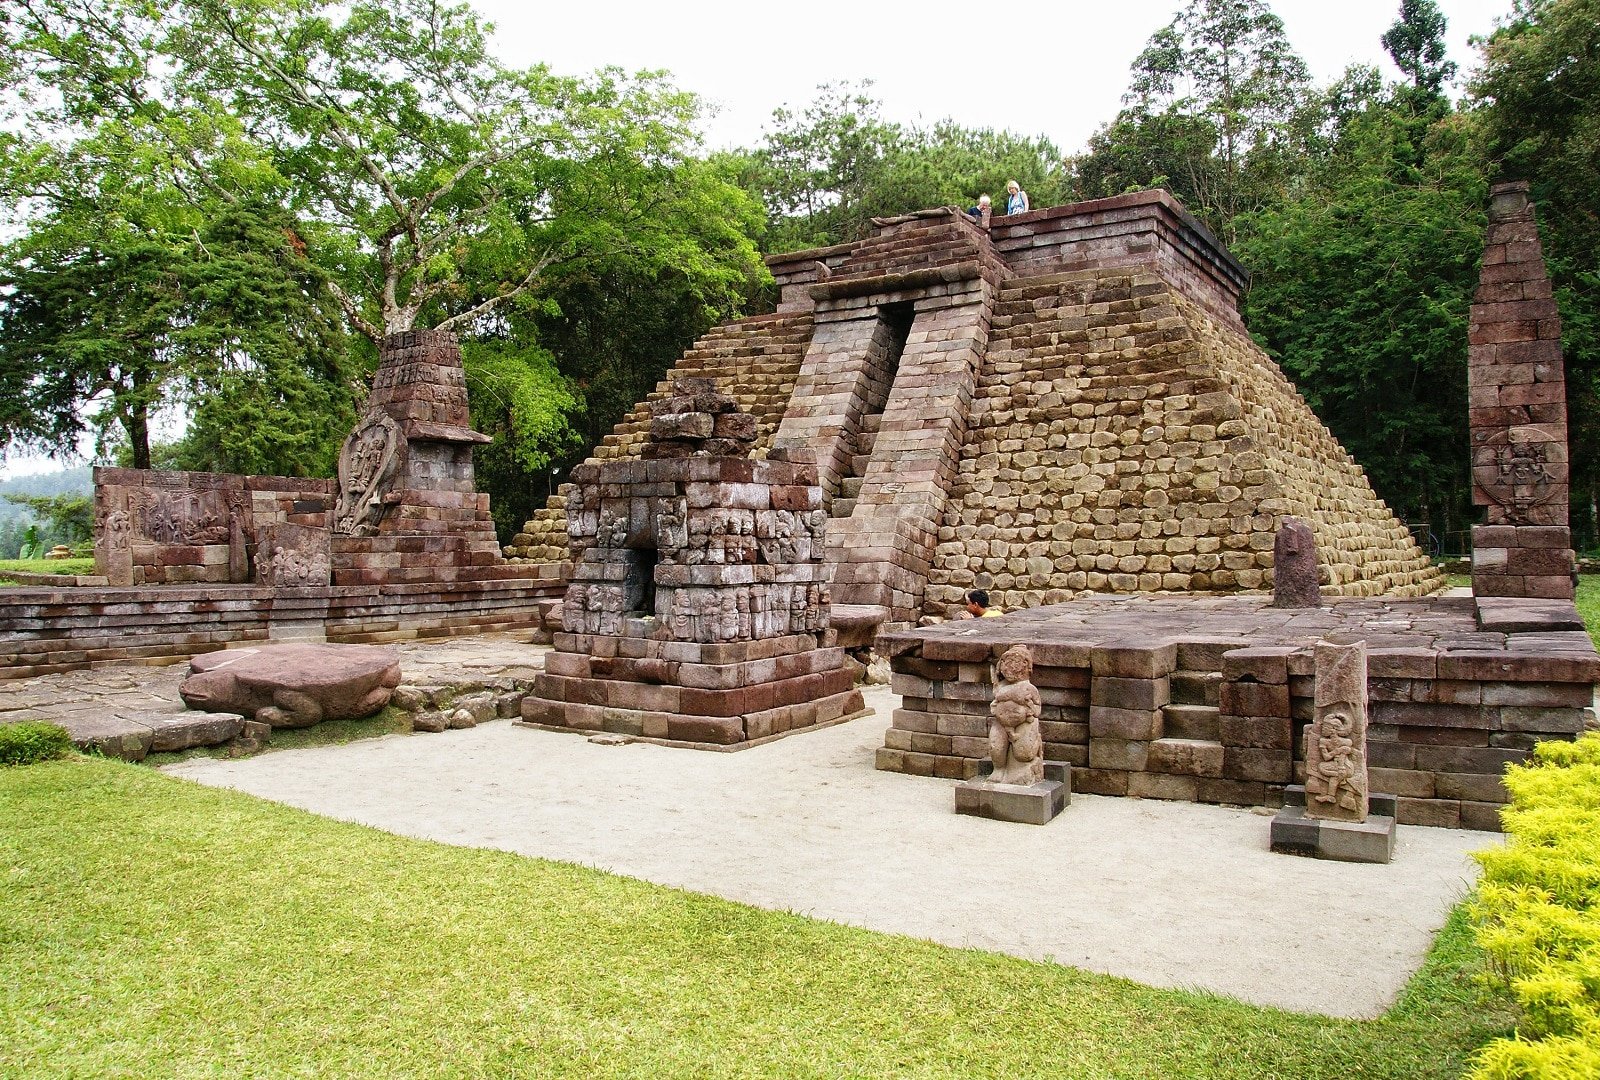 <p><span>On the slopes of Mount Lawu in Java, Indonesia, lies Candi Sukuh, a pyramid-like temple with unique Hindu-Buddhist carvings. Its terraced levels and thematic reliefs set it apart from other pyramid structures.</span></p> <p><b>Traveler’s Insight: </b><span>Explore the temple’s symbolic art, representing the human journey from worldly desires to enlightenment.</span></p> <p><b>Getting There: </b><span>Candi Sukuh is situated on the western slope of Mount Lawu, near Solo, Central Java. It’s accessible by car or motorbike from Solo or Yogyakarta.</span></p> <p><b>Things to Consider: </b><span>The temple is less touristy, so it’s a peaceful visit. However, the path can be steep and slippery, especially during the rainy season, so wear appropriate footwear.</span></p>